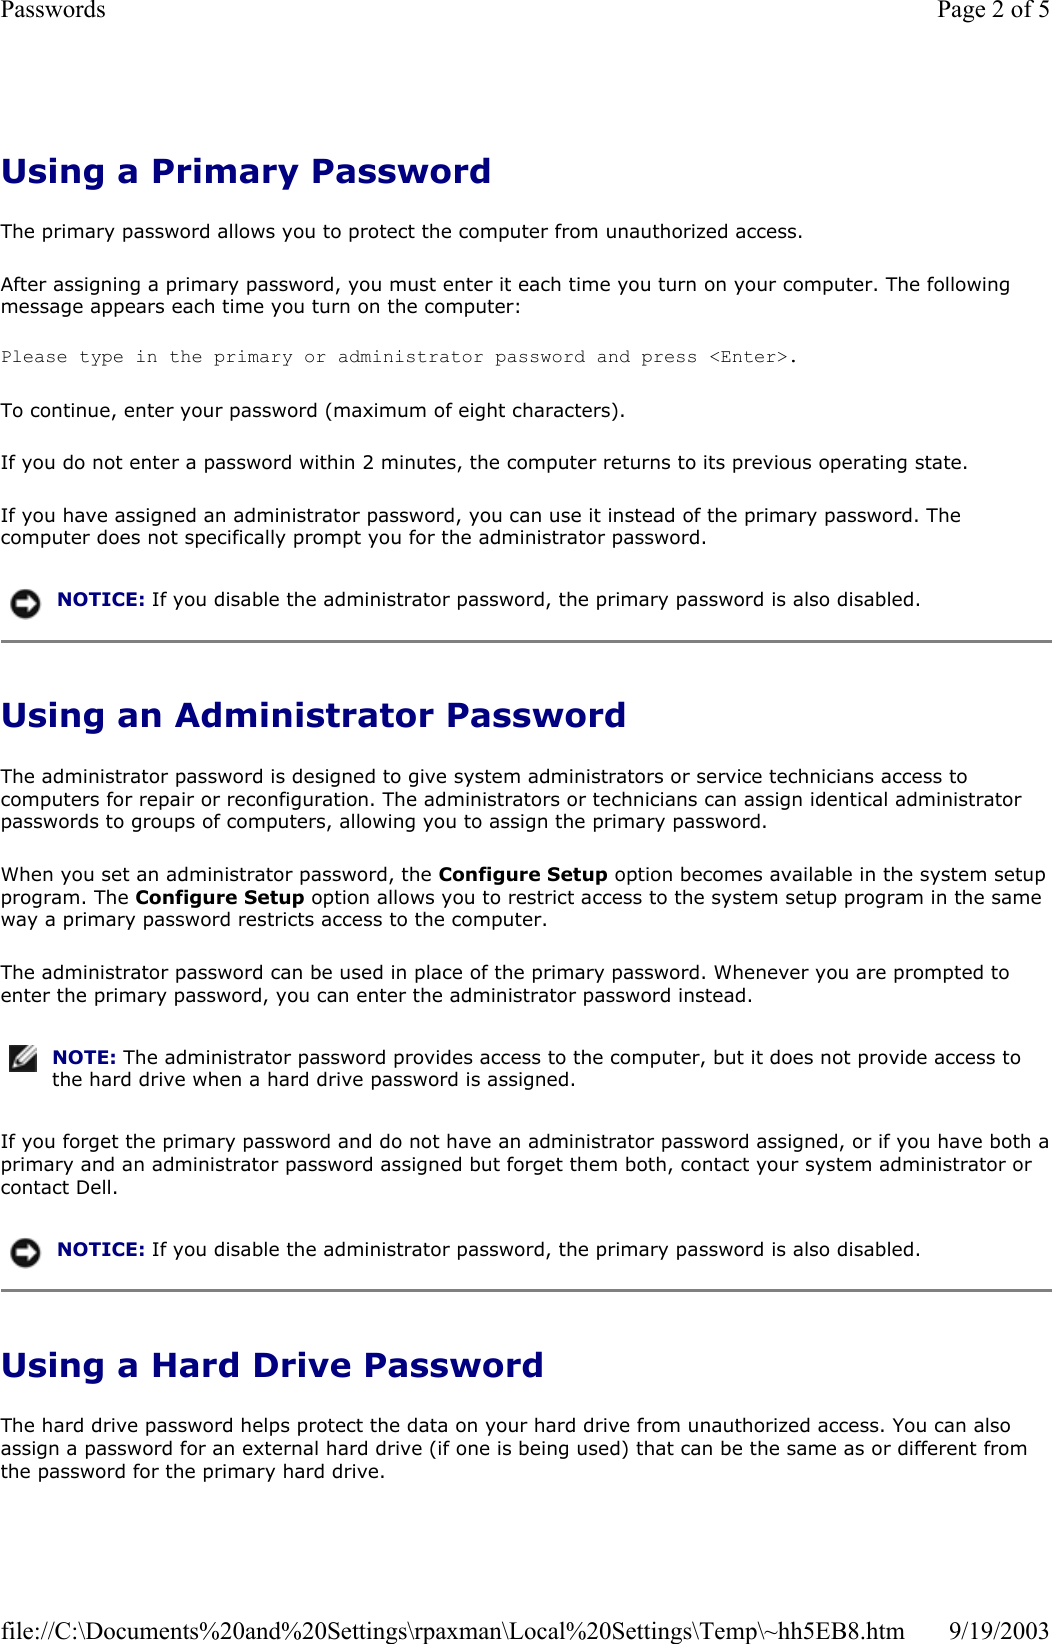 Using a Primary Password The primary password allows you to protect the computer from unauthorized access. After assigning a primary password, you must enter it each time you turn on your computer. The following message appears each time you turn on the computer: Please type in the primary or administrator password and press &lt;Enter&gt;.  To continue, enter your password (maximum of eight characters). If you do not enter a password within 2 minutes, the computer returns to its previous operating state. If you have assigned an administrator password, you can use it instead of the primary password. The computer does not specifically prompt you for the administrator password. Using an Administrator Password The administrator password is designed to give system administrators or service technicians access to computers for repair or reconfiguration. The administrators or technicians can assign identical administrator passwords to groups of computers, allowing you to assign the primary password. When you set an administrator password, the Configure Setup option becomes available in the system setup program. The Configure Setup option allows you to restrict access to the system setup program in the same way a primary password restricts access to the computer. The administrator password can be used in place of the primary password. Whenever you are prompted to enter the primary password, you can enter the administrator password instead. If you forget the primary password and do not have an administrator password assigned, or if you have both aprimary and an administrator password assigned but forget them both, contact your system administrator or contact Dell. Using a Hard Drive Password The hard drive password helps protect the data on your hard drive from unauthorized access. You can also assign a password for an external hard drive (if one is being used) that can be the same as or different from the password for the primary hard drive. NOTICE: If you disable the administrator password, the primary password is also disabled. NOTE: The administrator password provides access to the computer, but it does not provide access to the hard drive when a hard drive password is assigned. NOTICE: If you disable the administrator password, the primary password is also disabled. Page 2 of 5Passwords9/19/2003file://C:\Documents%20and%20Settings\rpaxman\Local%20Settings\Temp\~hh5EB8.htm